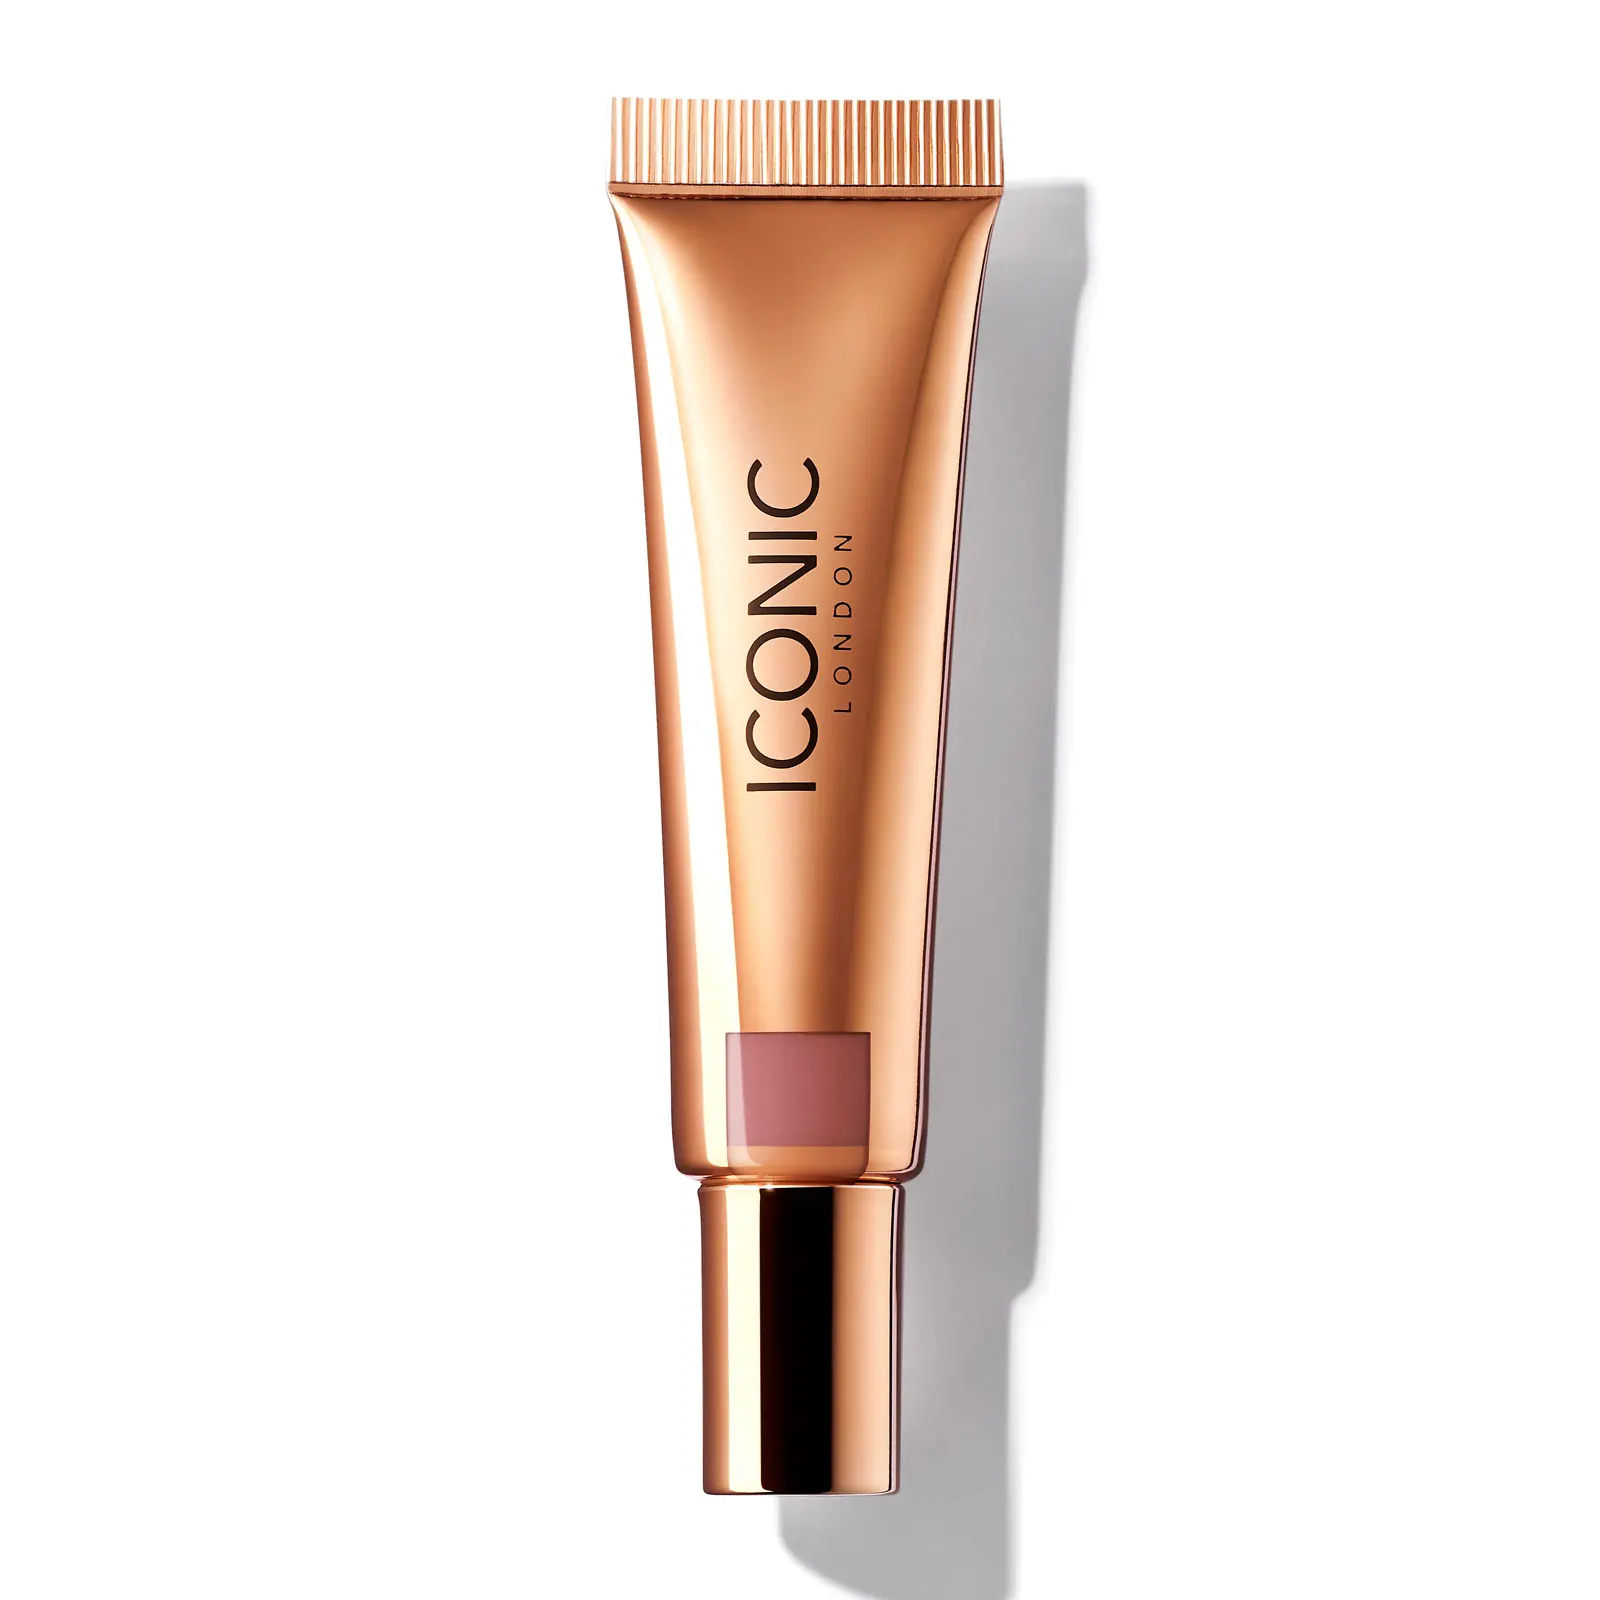 ICONIC London Sheer Blush Discounts and Cashback